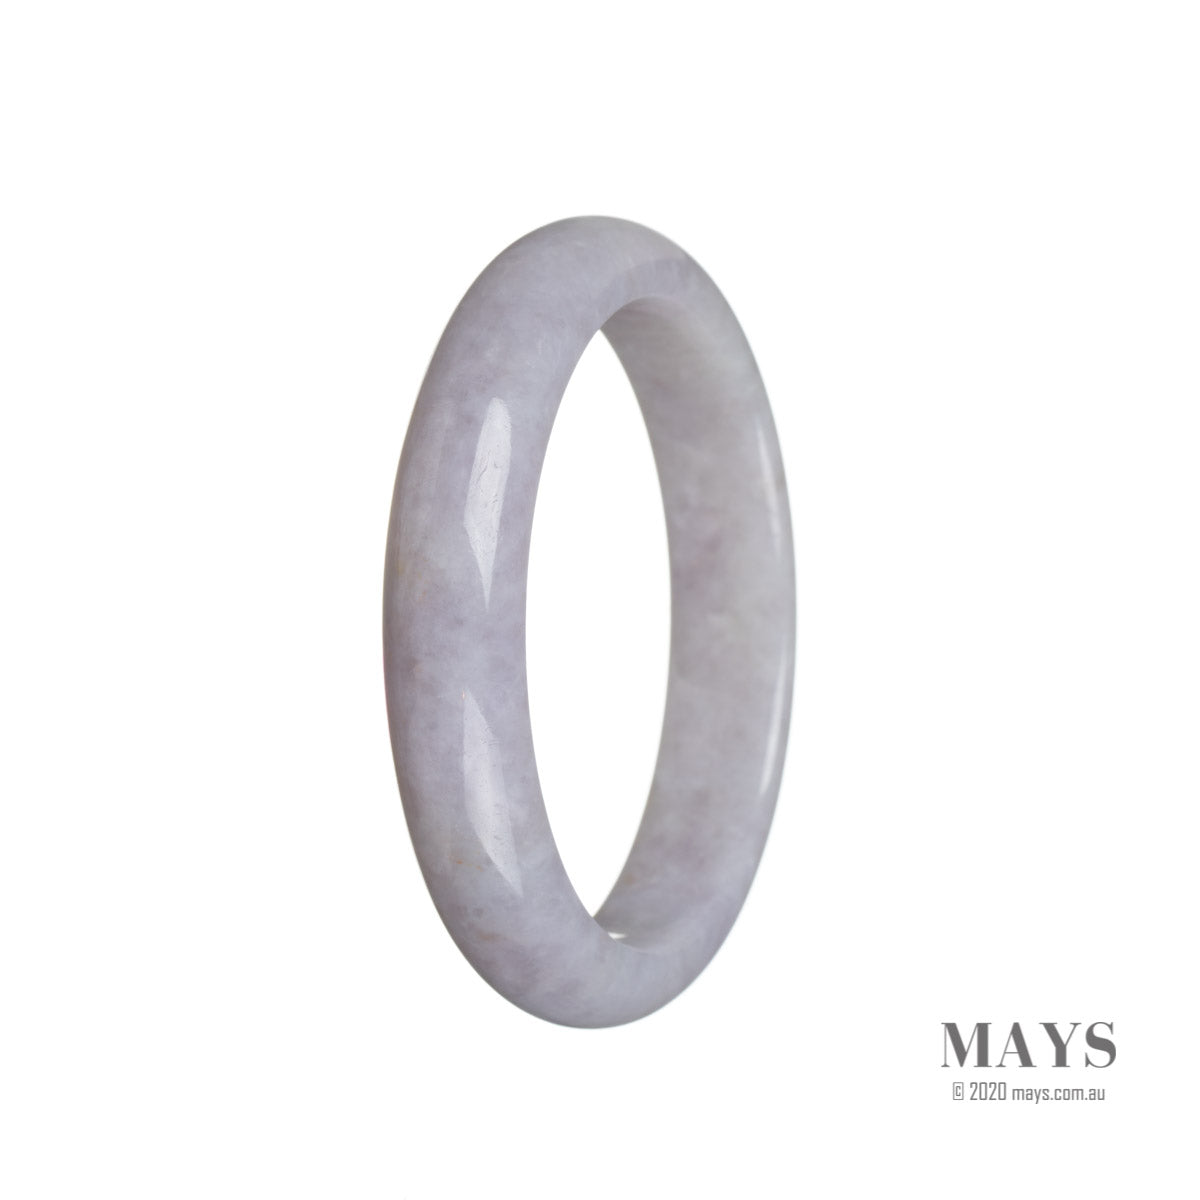 A lavender Burmese jade bangle bracelet with a semi-round shape, measuring 57mm in size.